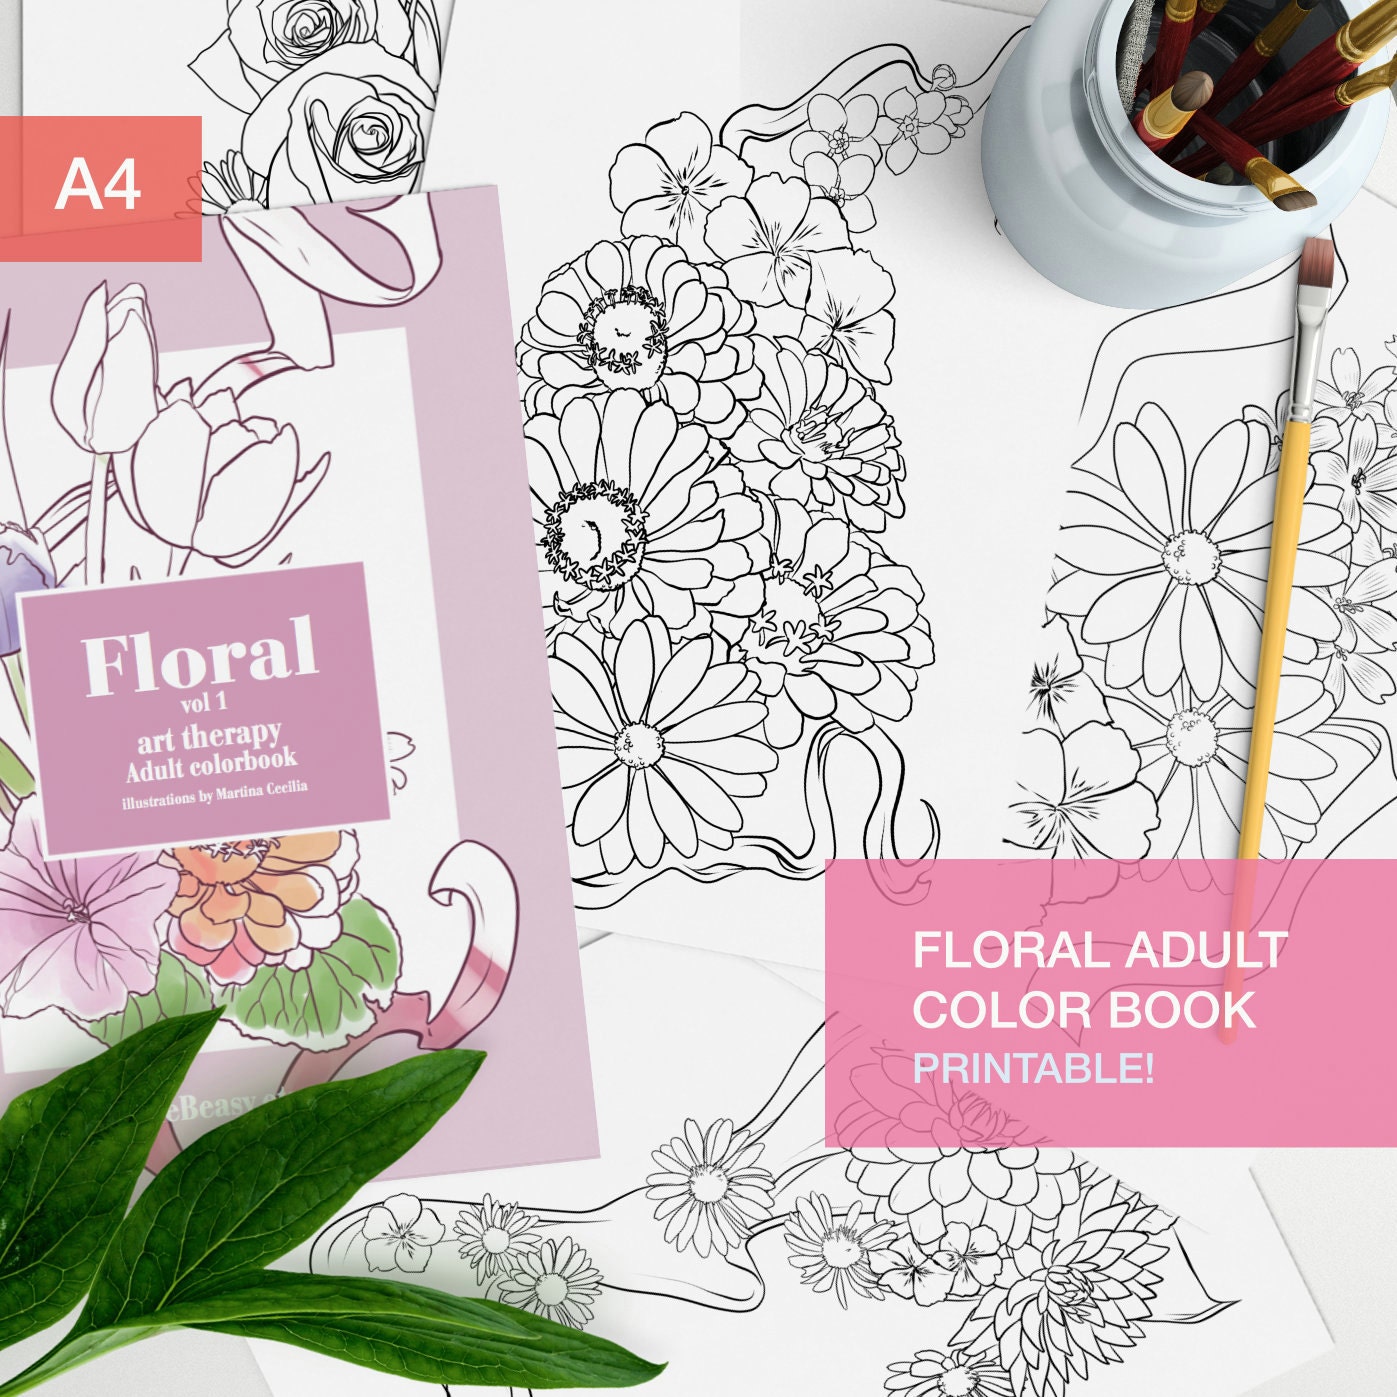 Floral Adult Coloring Book Pdf - 10 coloring pages ...